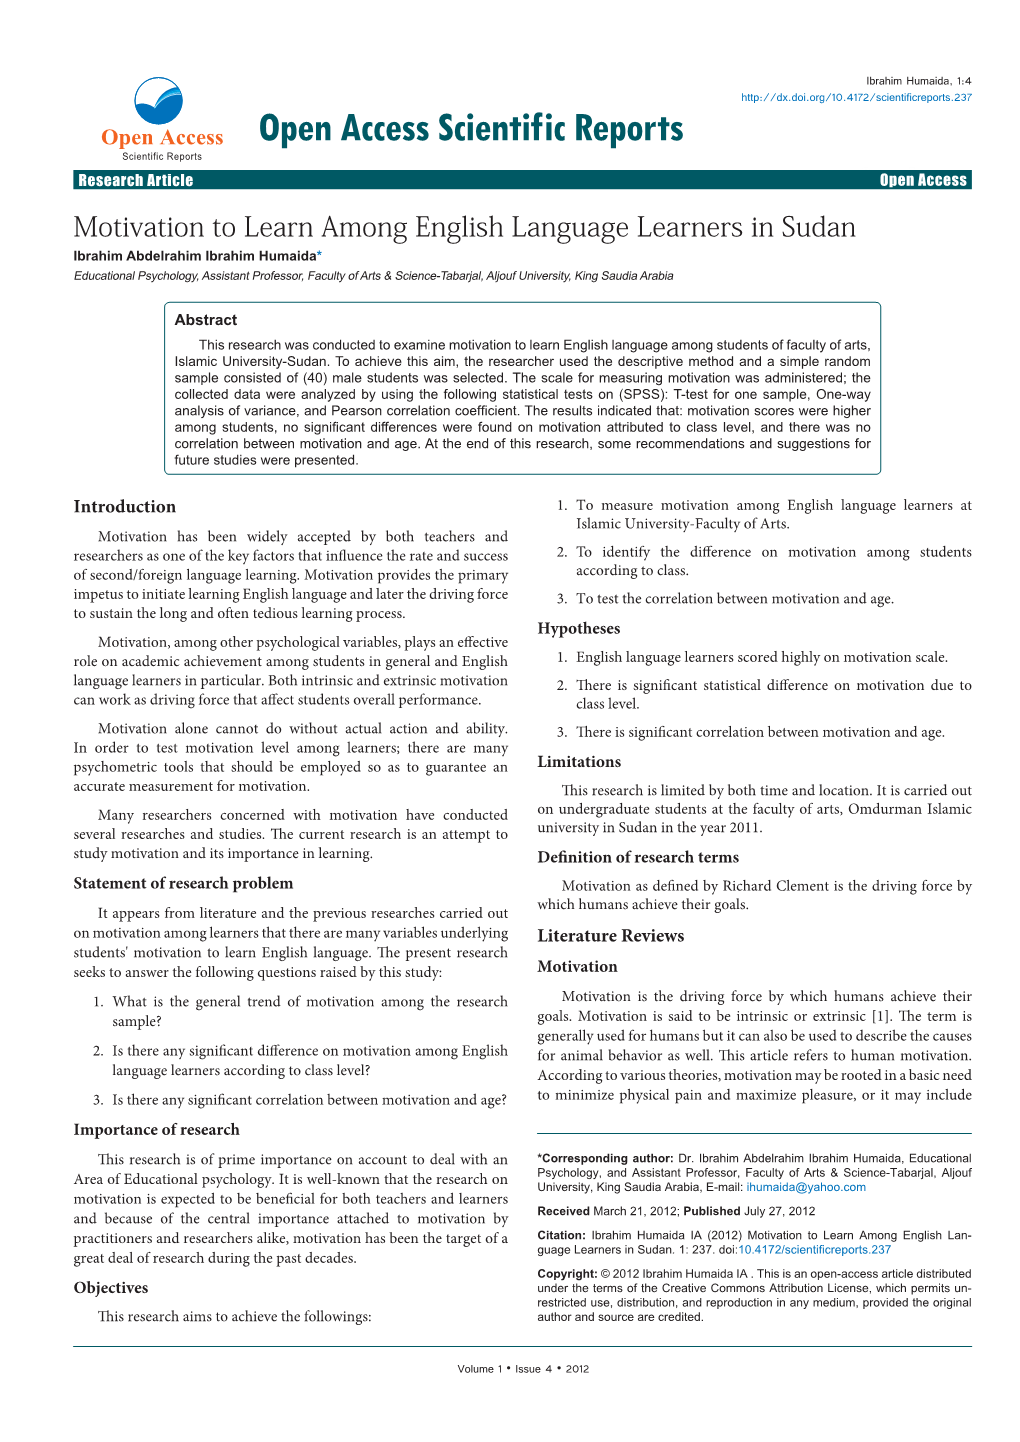 Motivation to Learn Among English Language Learners in Sudan